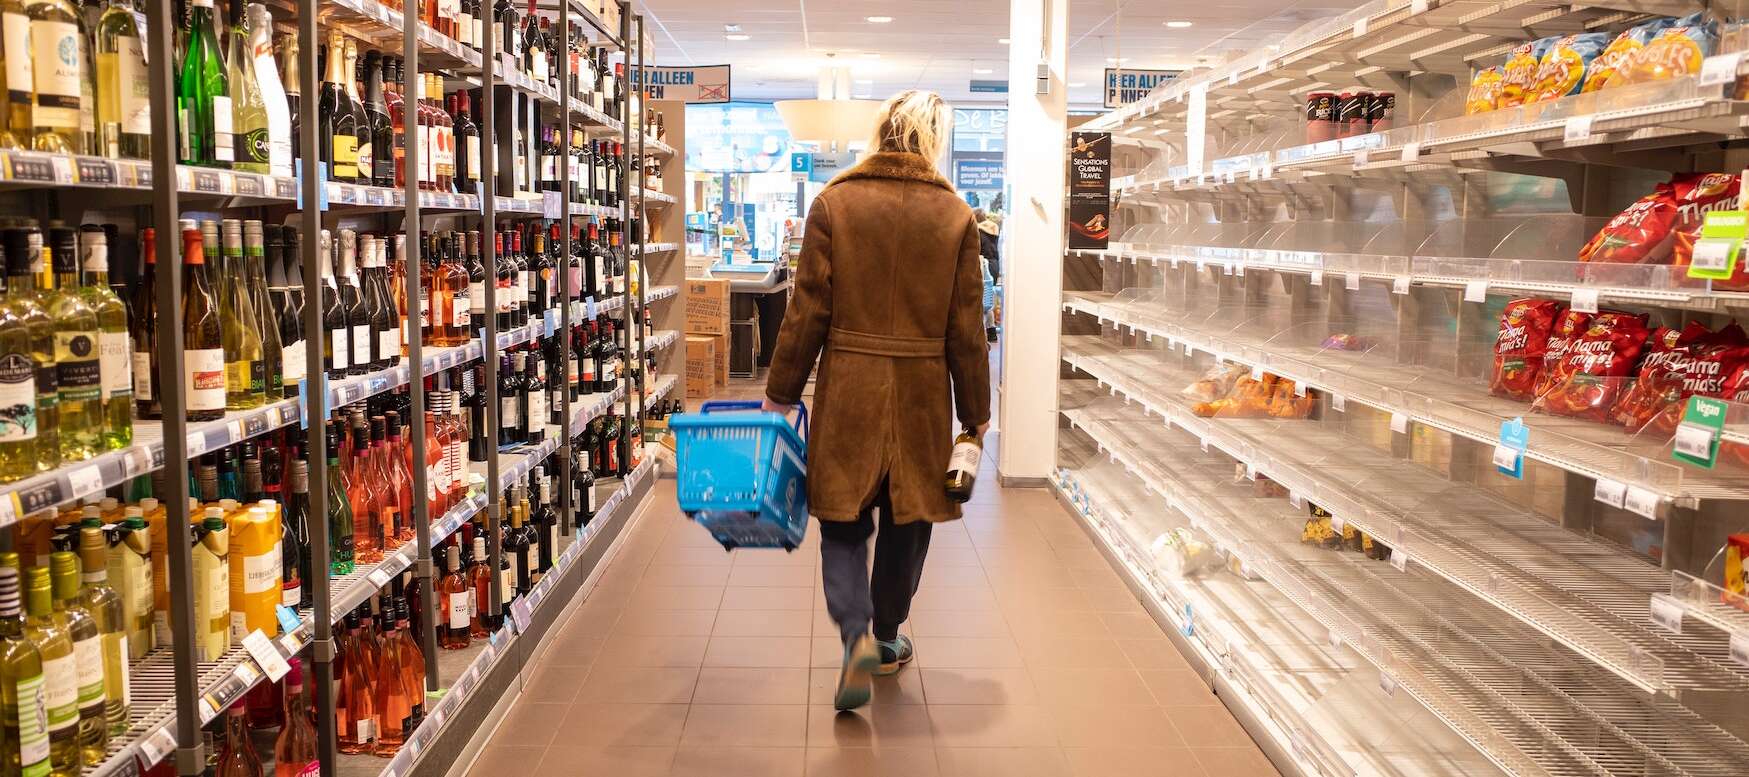 A person is seen from behind in a grocery store aisle with some empty shelves